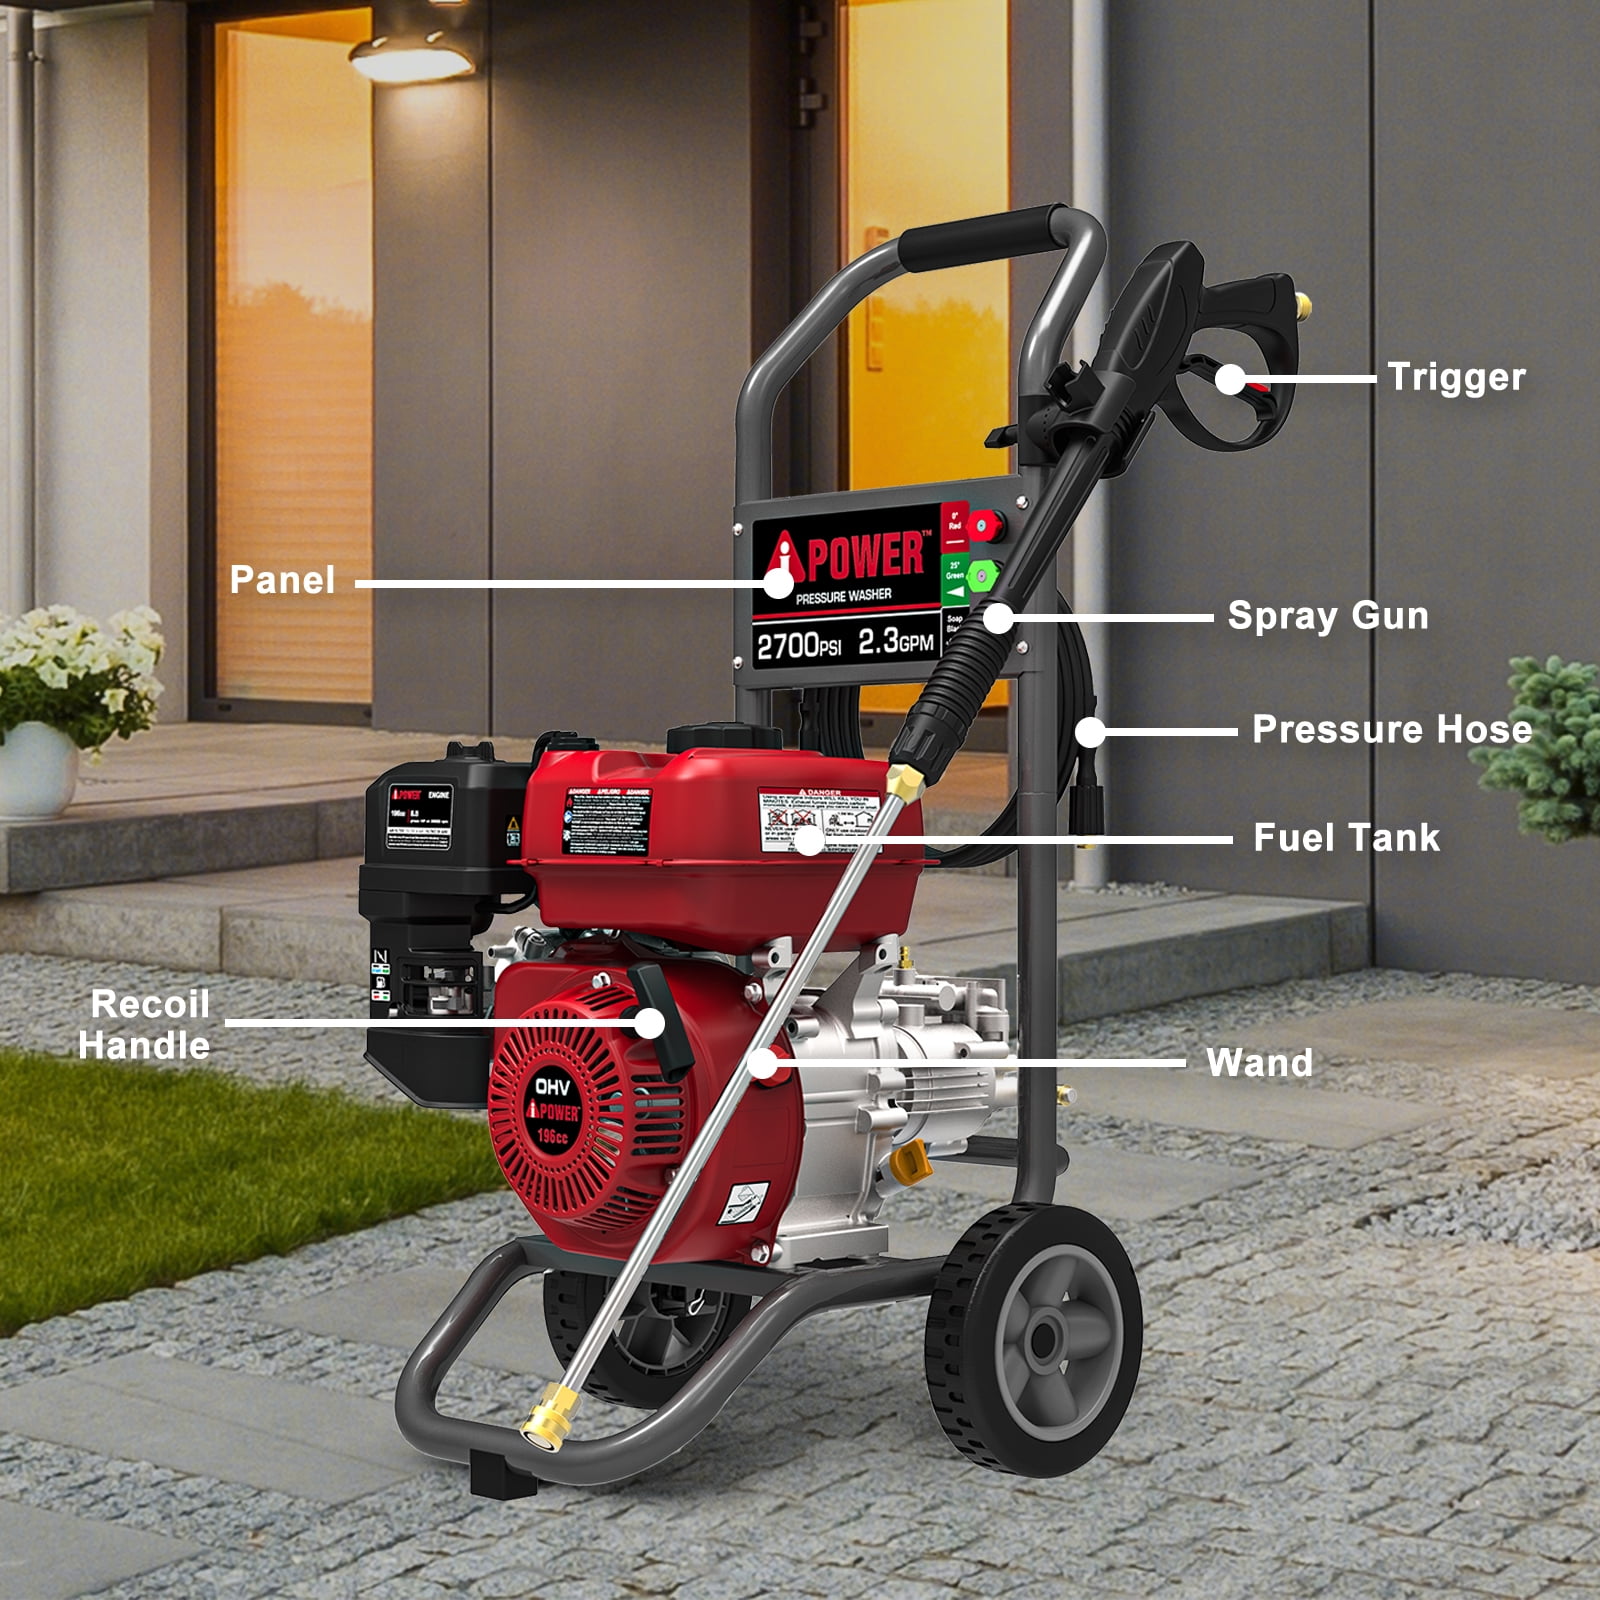 A-iPower 2700 PSI at 2.3 GPM 196cc 4-Cycle OHV Gas Powered Cold Water Pressure Washer - 3